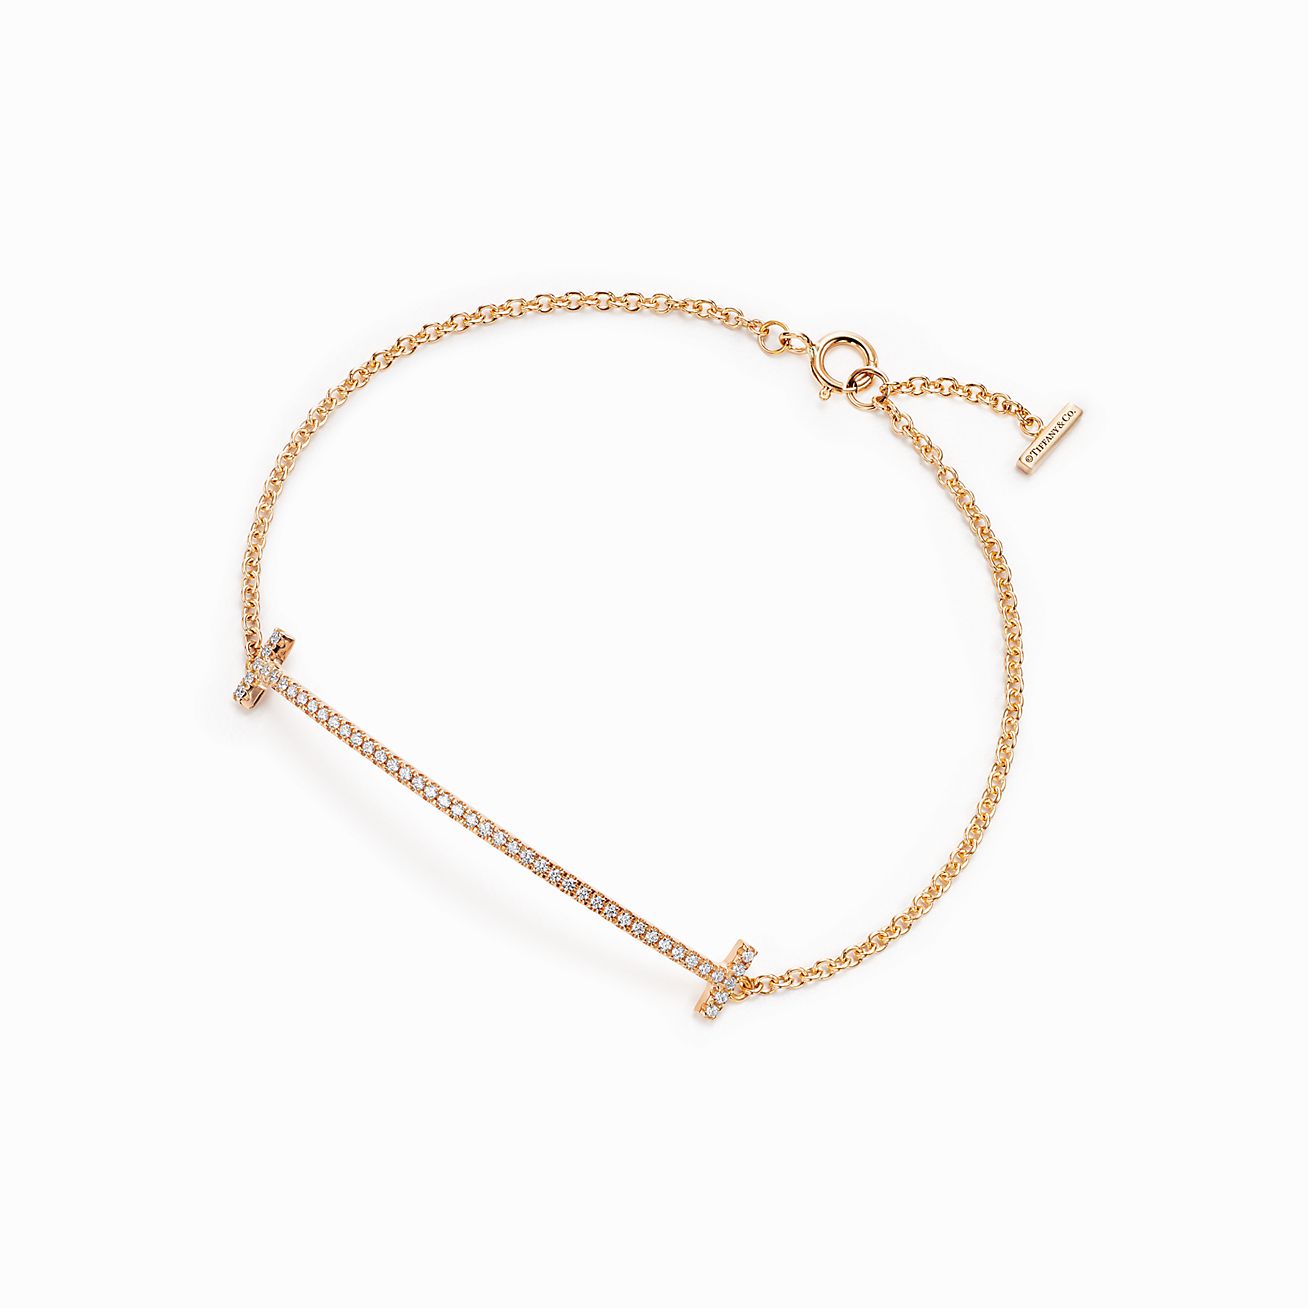 Tiffany T Smile Bracelet in Yellow Gold on A Black Cord, Size: Medium to Extra Large